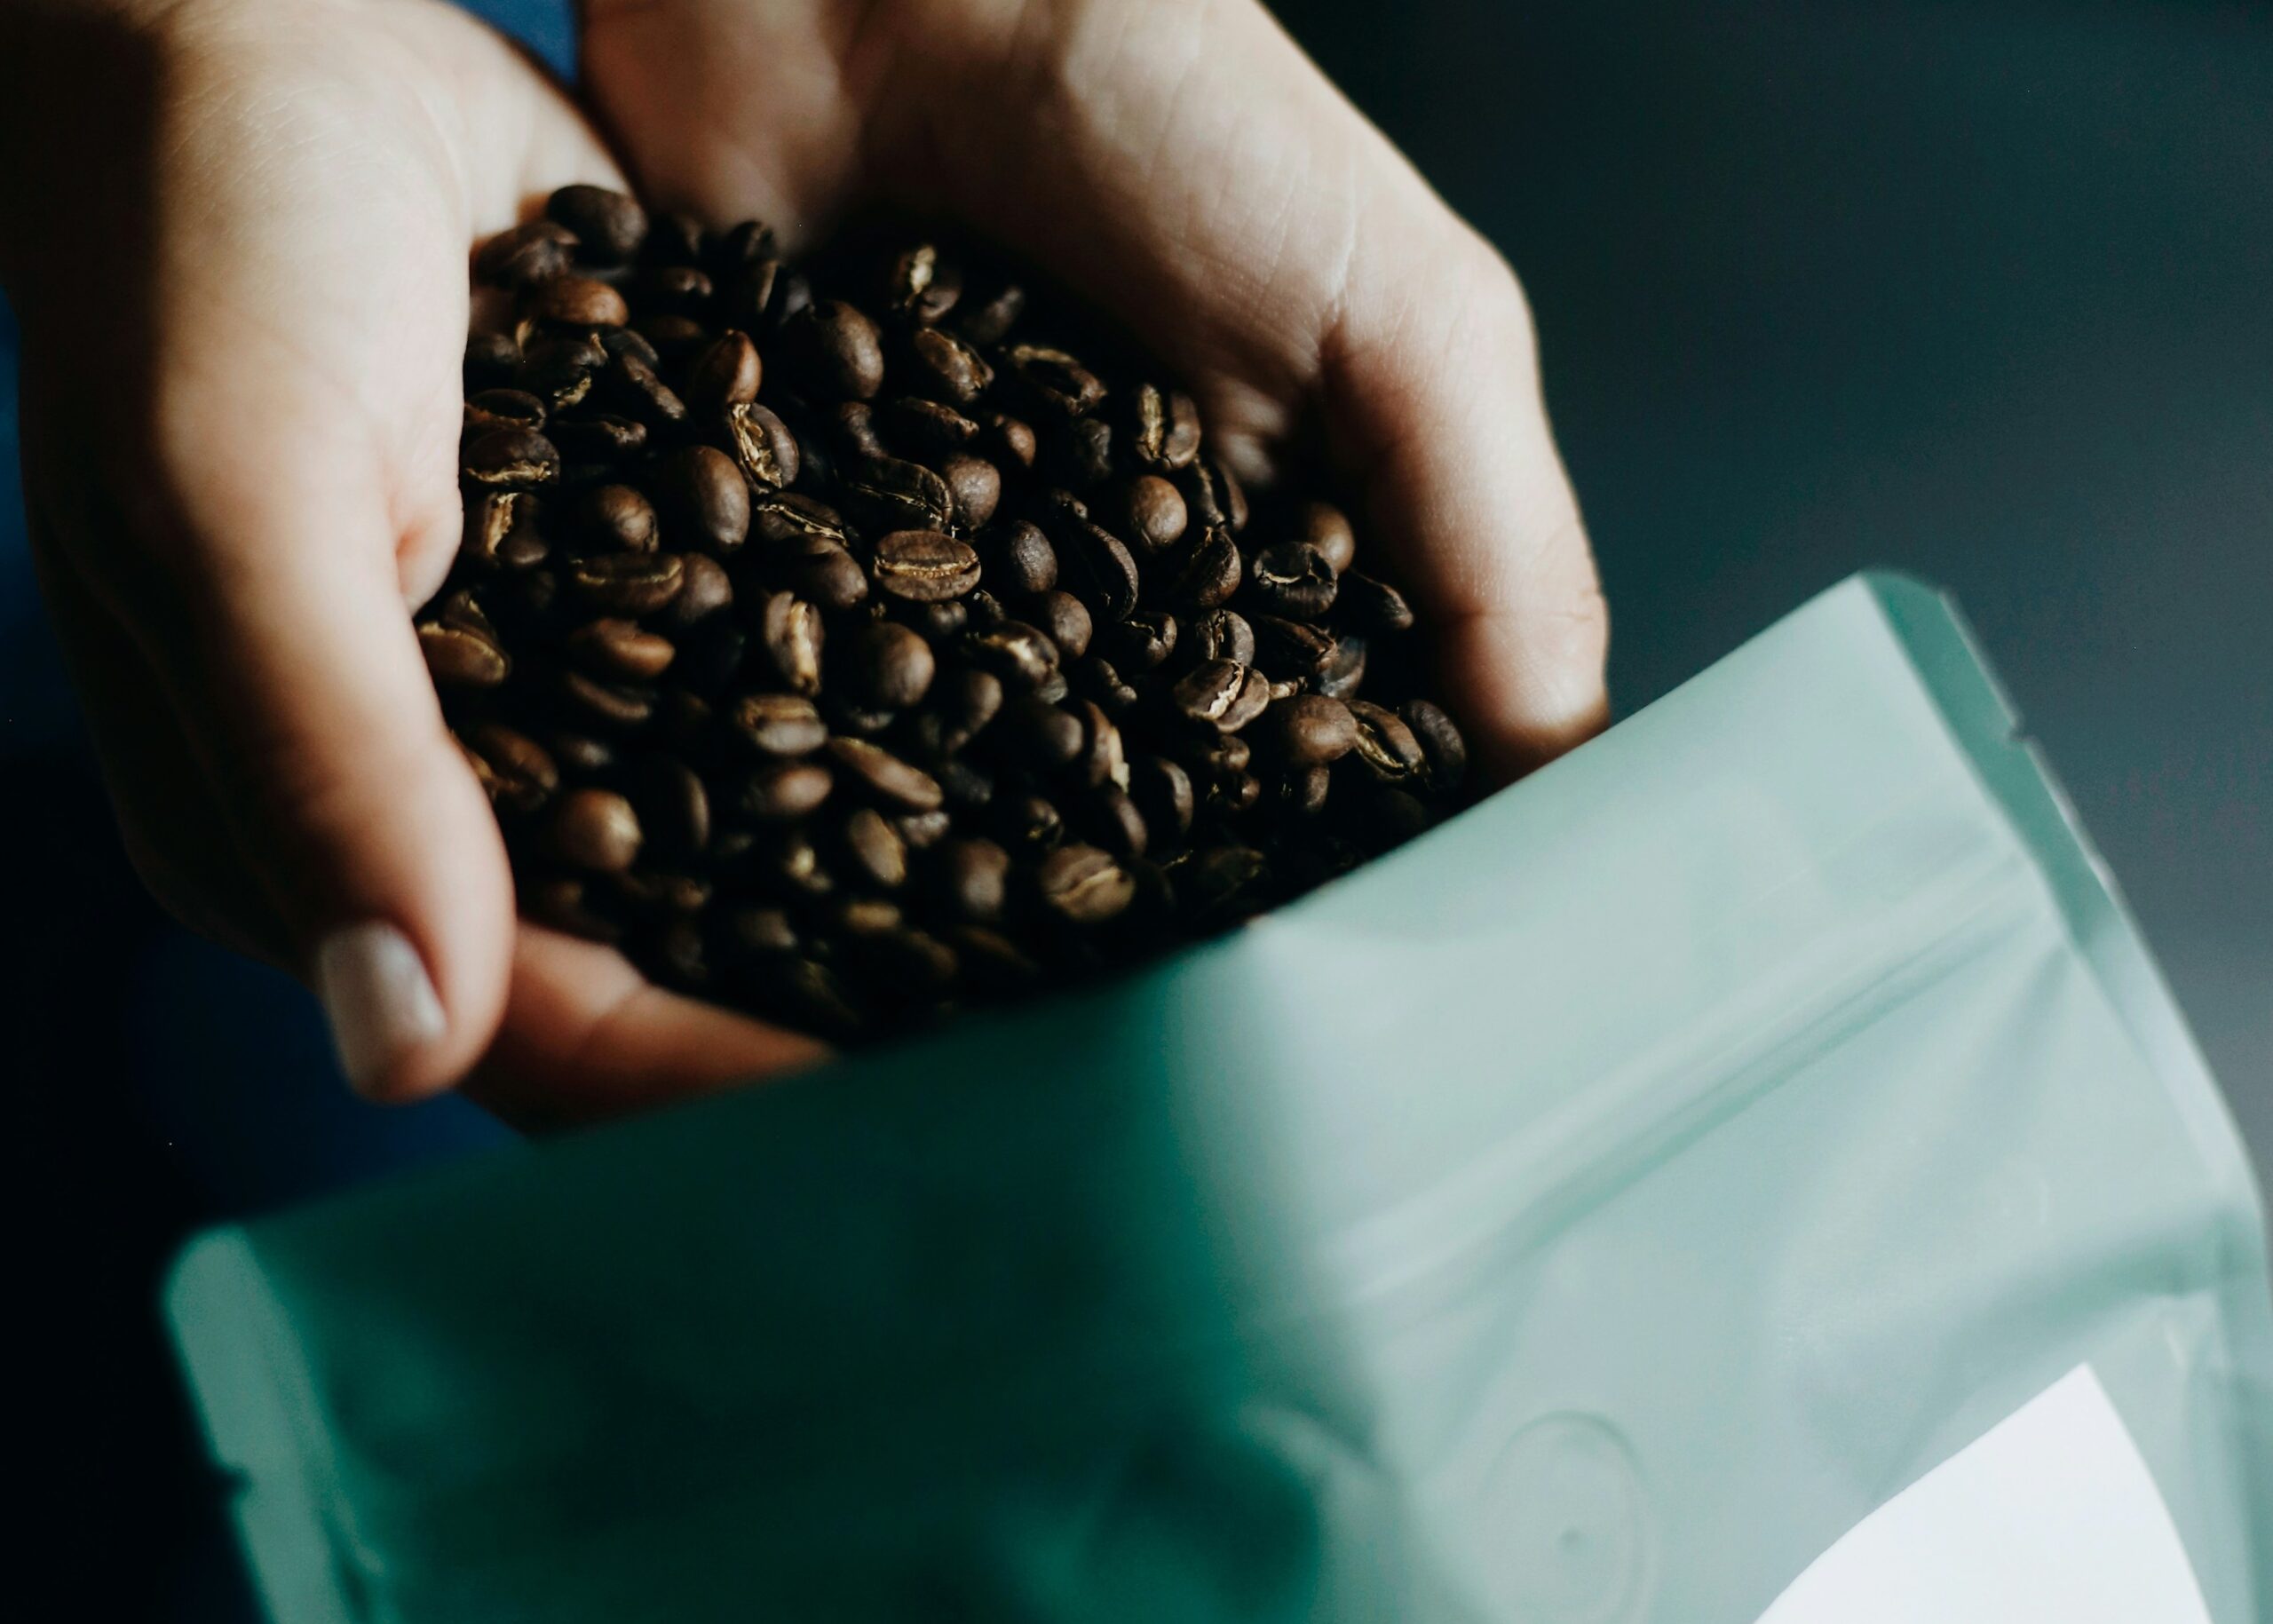 How do coffee beans differ from country to country?